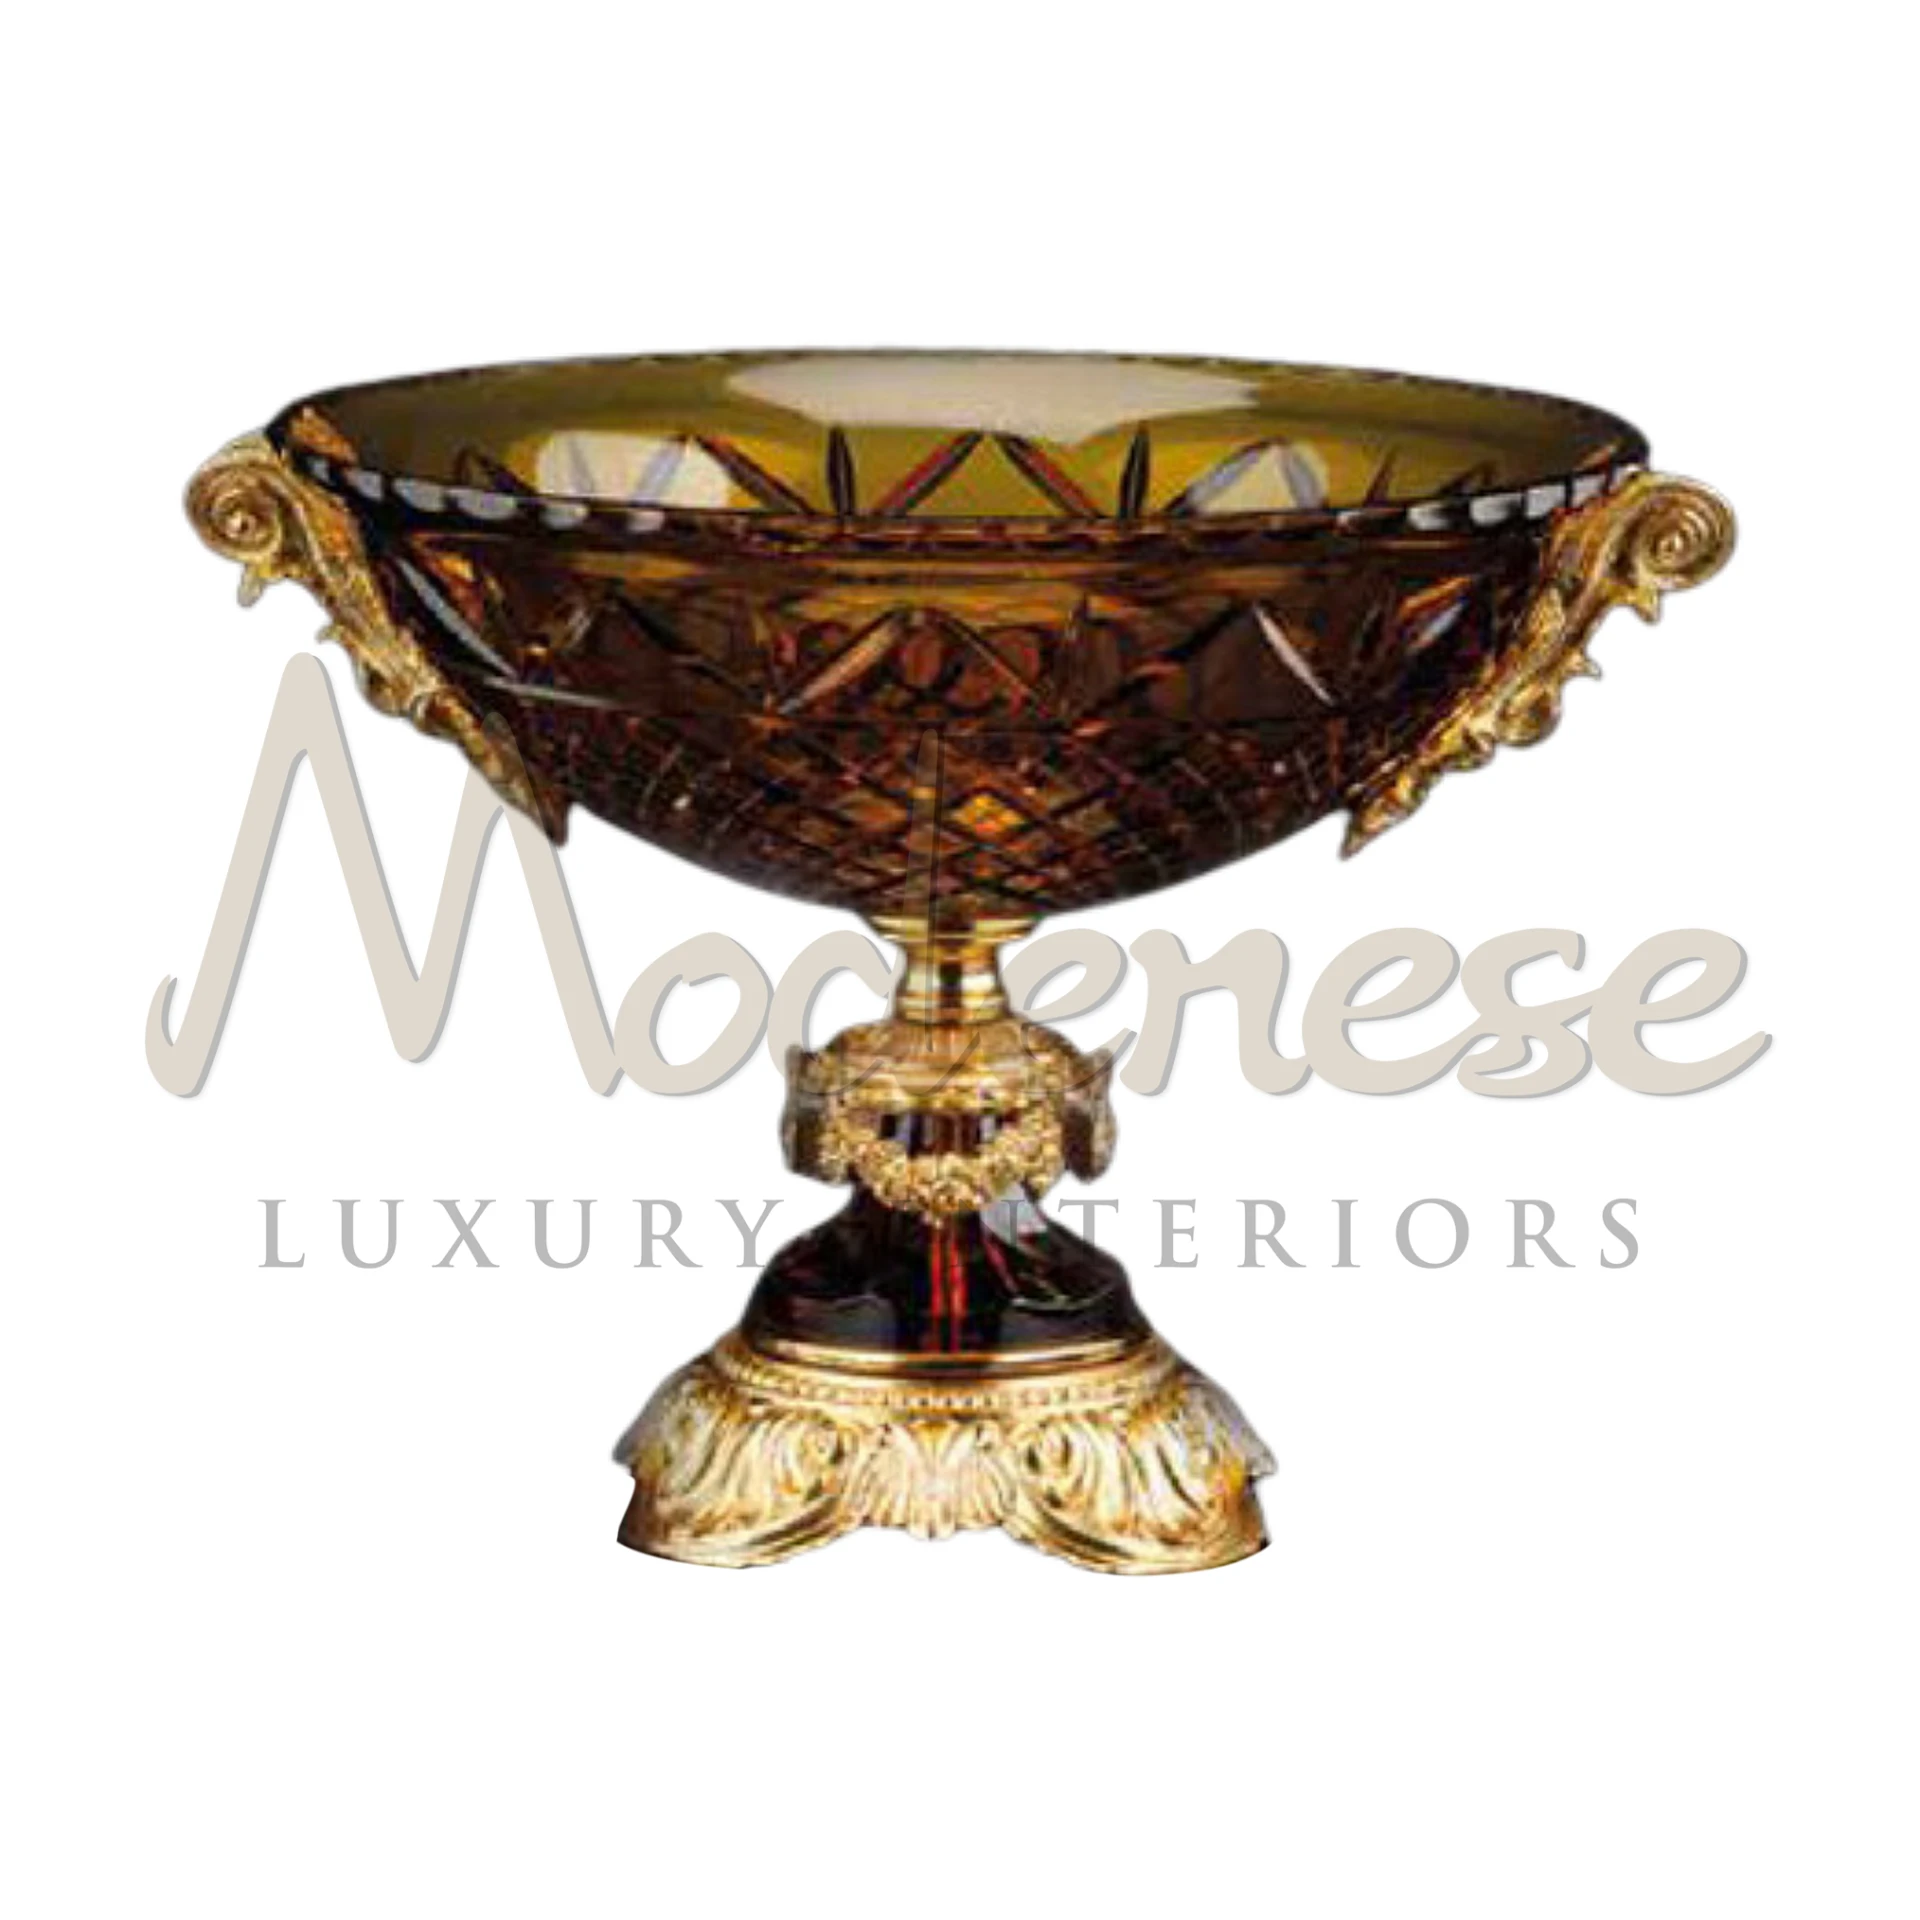 Luxury Classic Royal Bowl with intricate patterns, epitome of elegance in porcelain, crystal, or silver, ideal for refined interior design.






